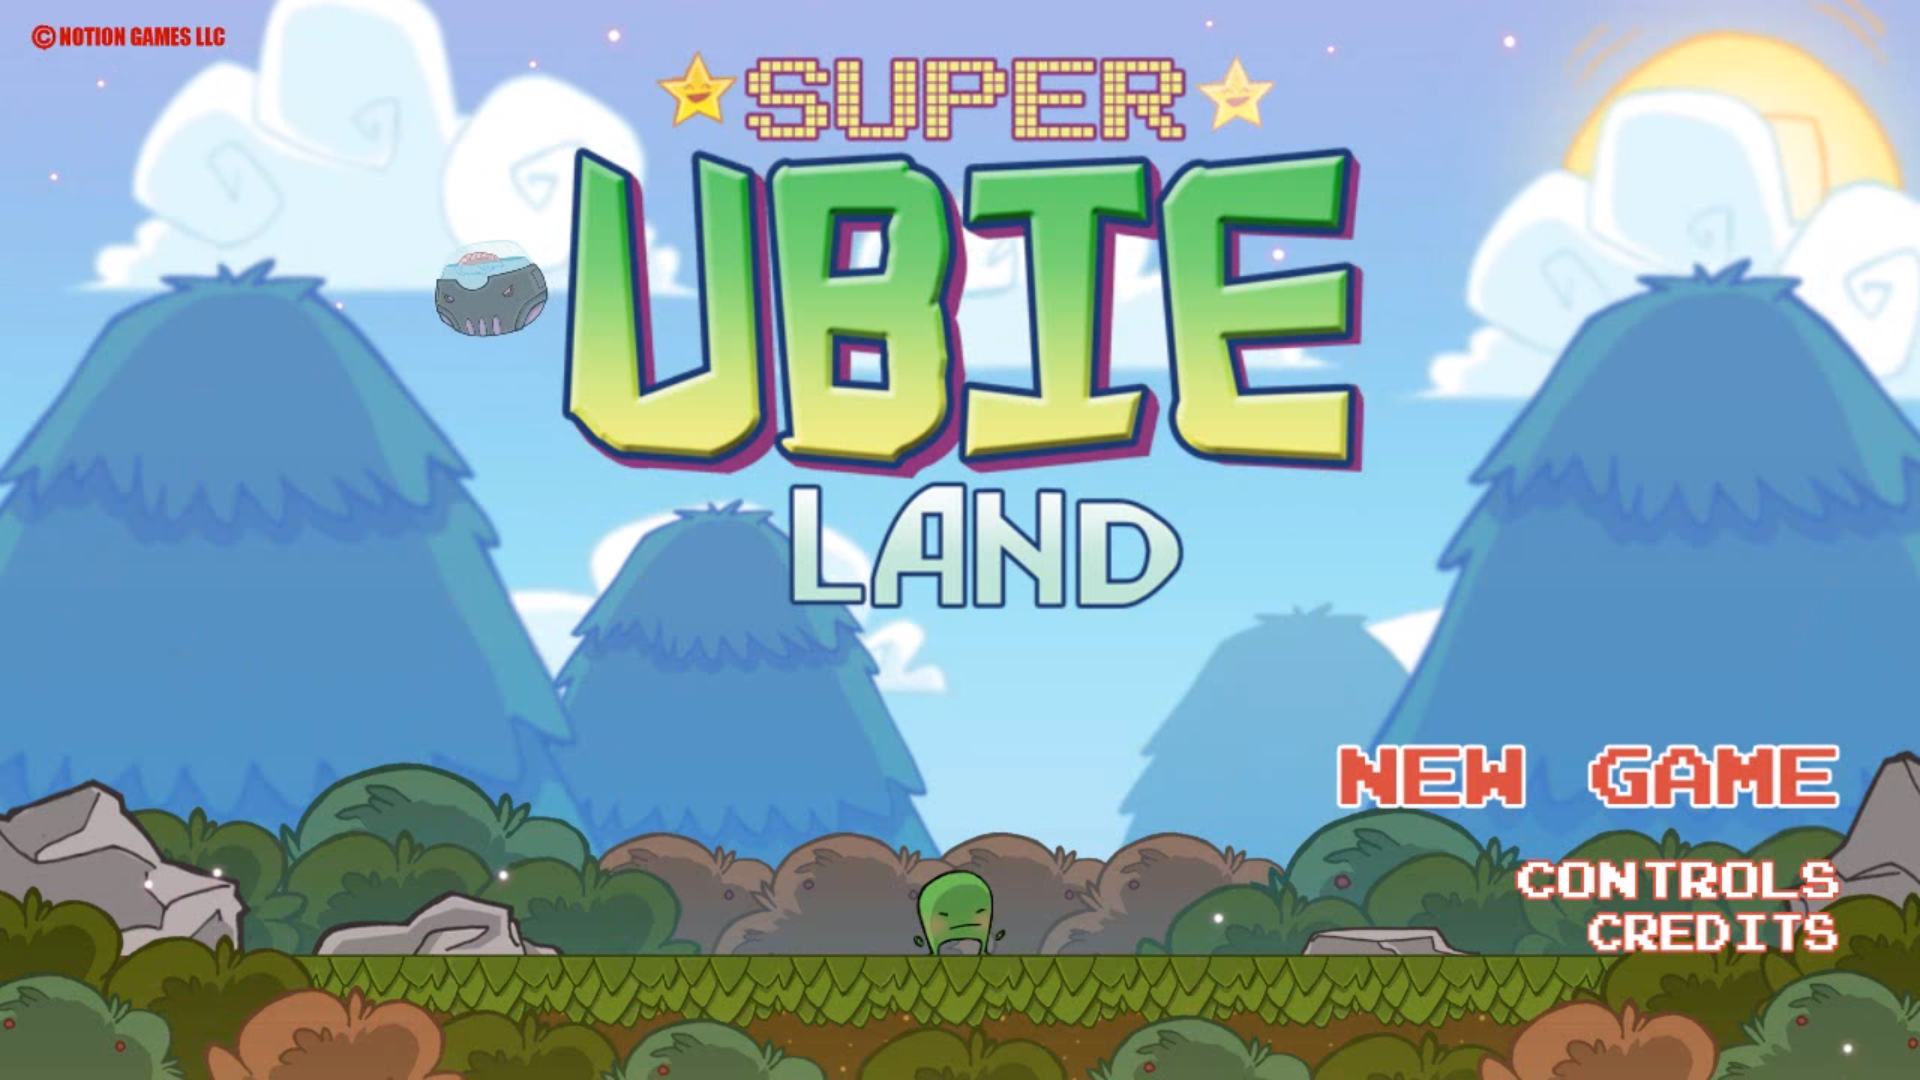 Notion Games Releases Name Of Super Ubie Land’s Wii U Release